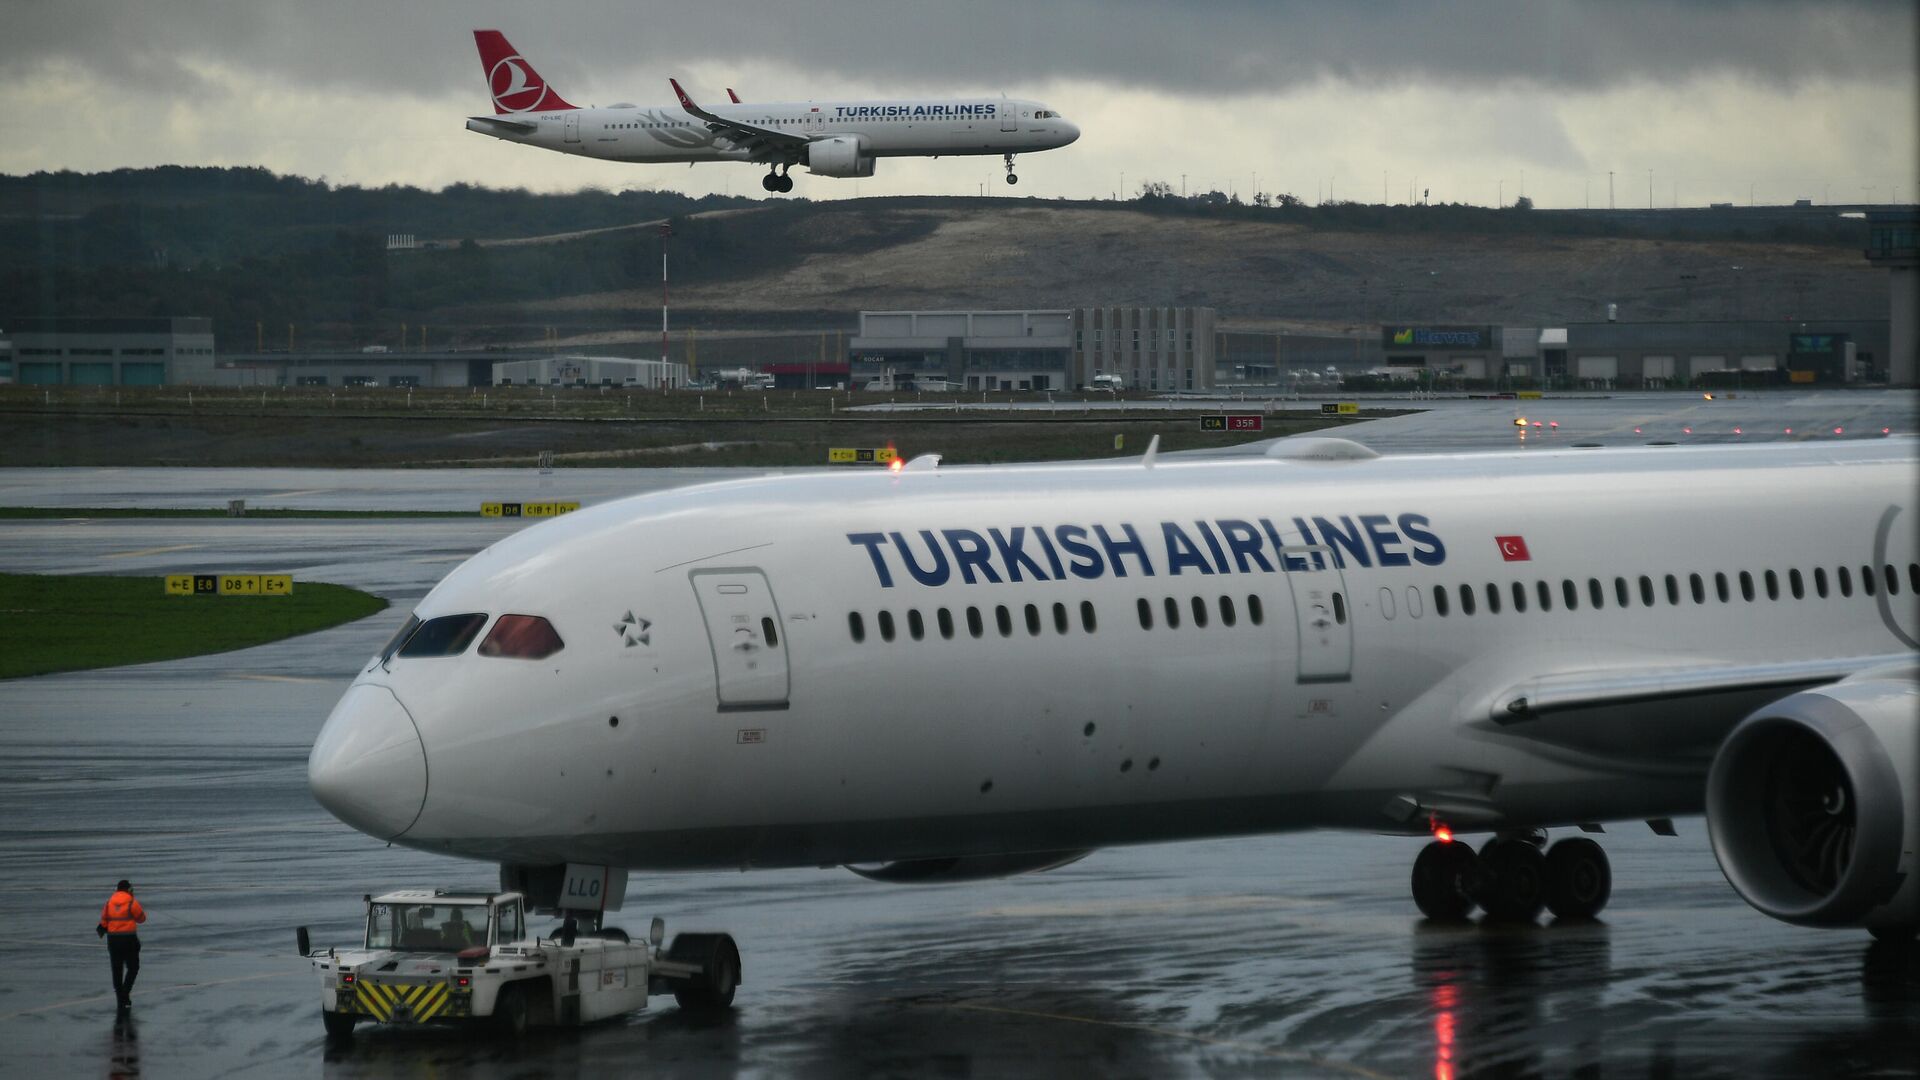 Turkish Airline is first airline company in the world that has fully recovered after coronavirus. Part 1